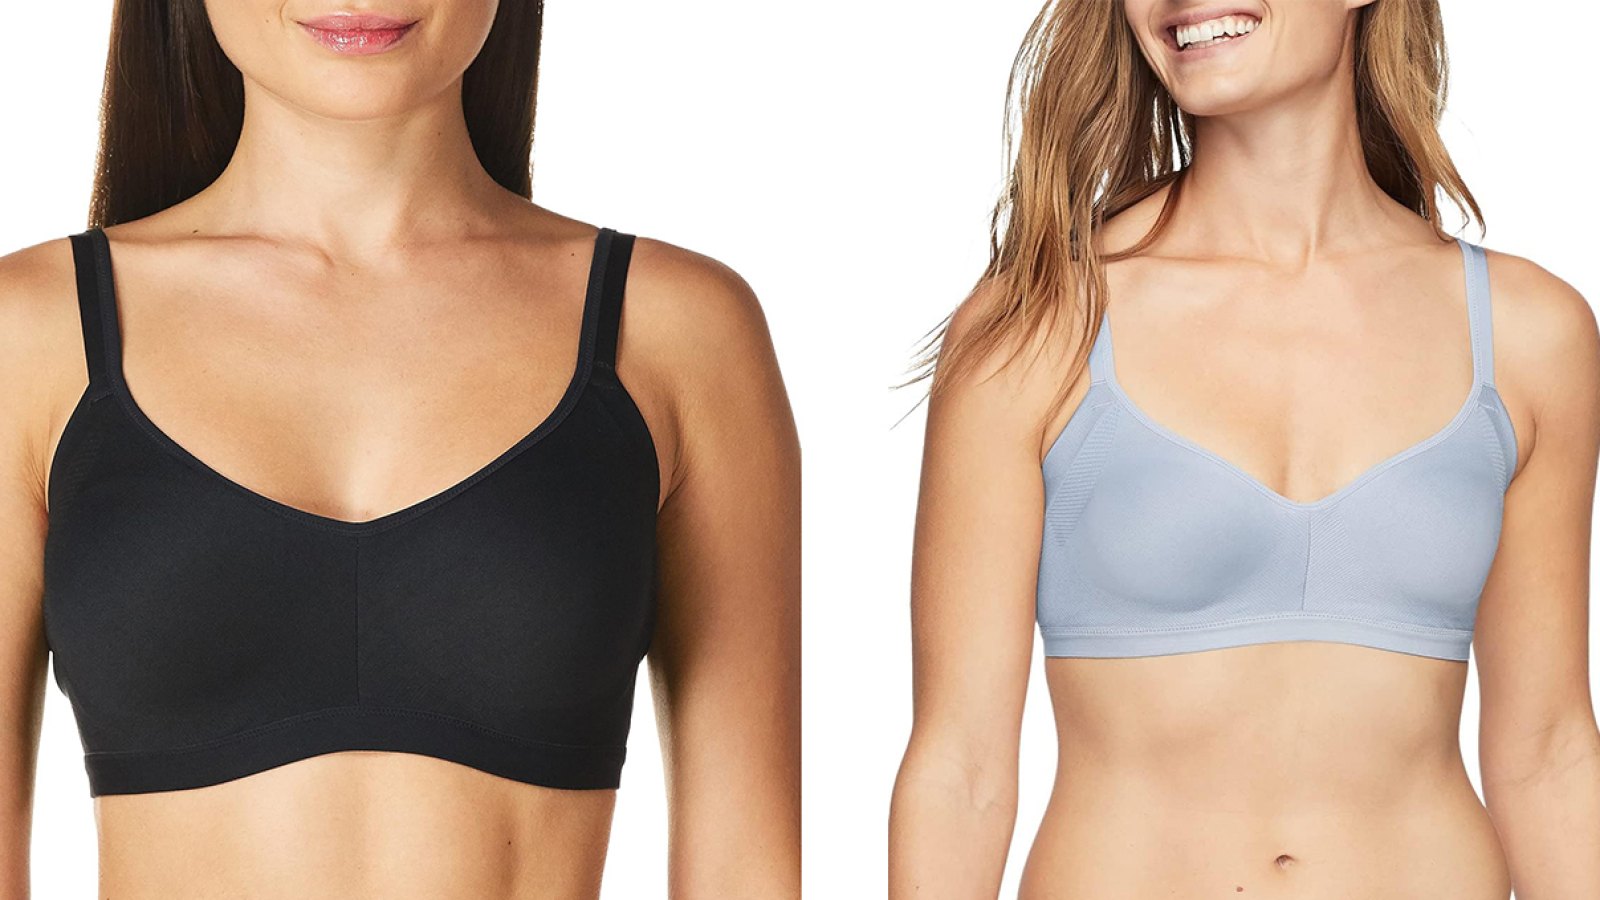 My Mom and I Are Stocking Up On Our Favorite Wire-Free Bra While It's 50%  Off